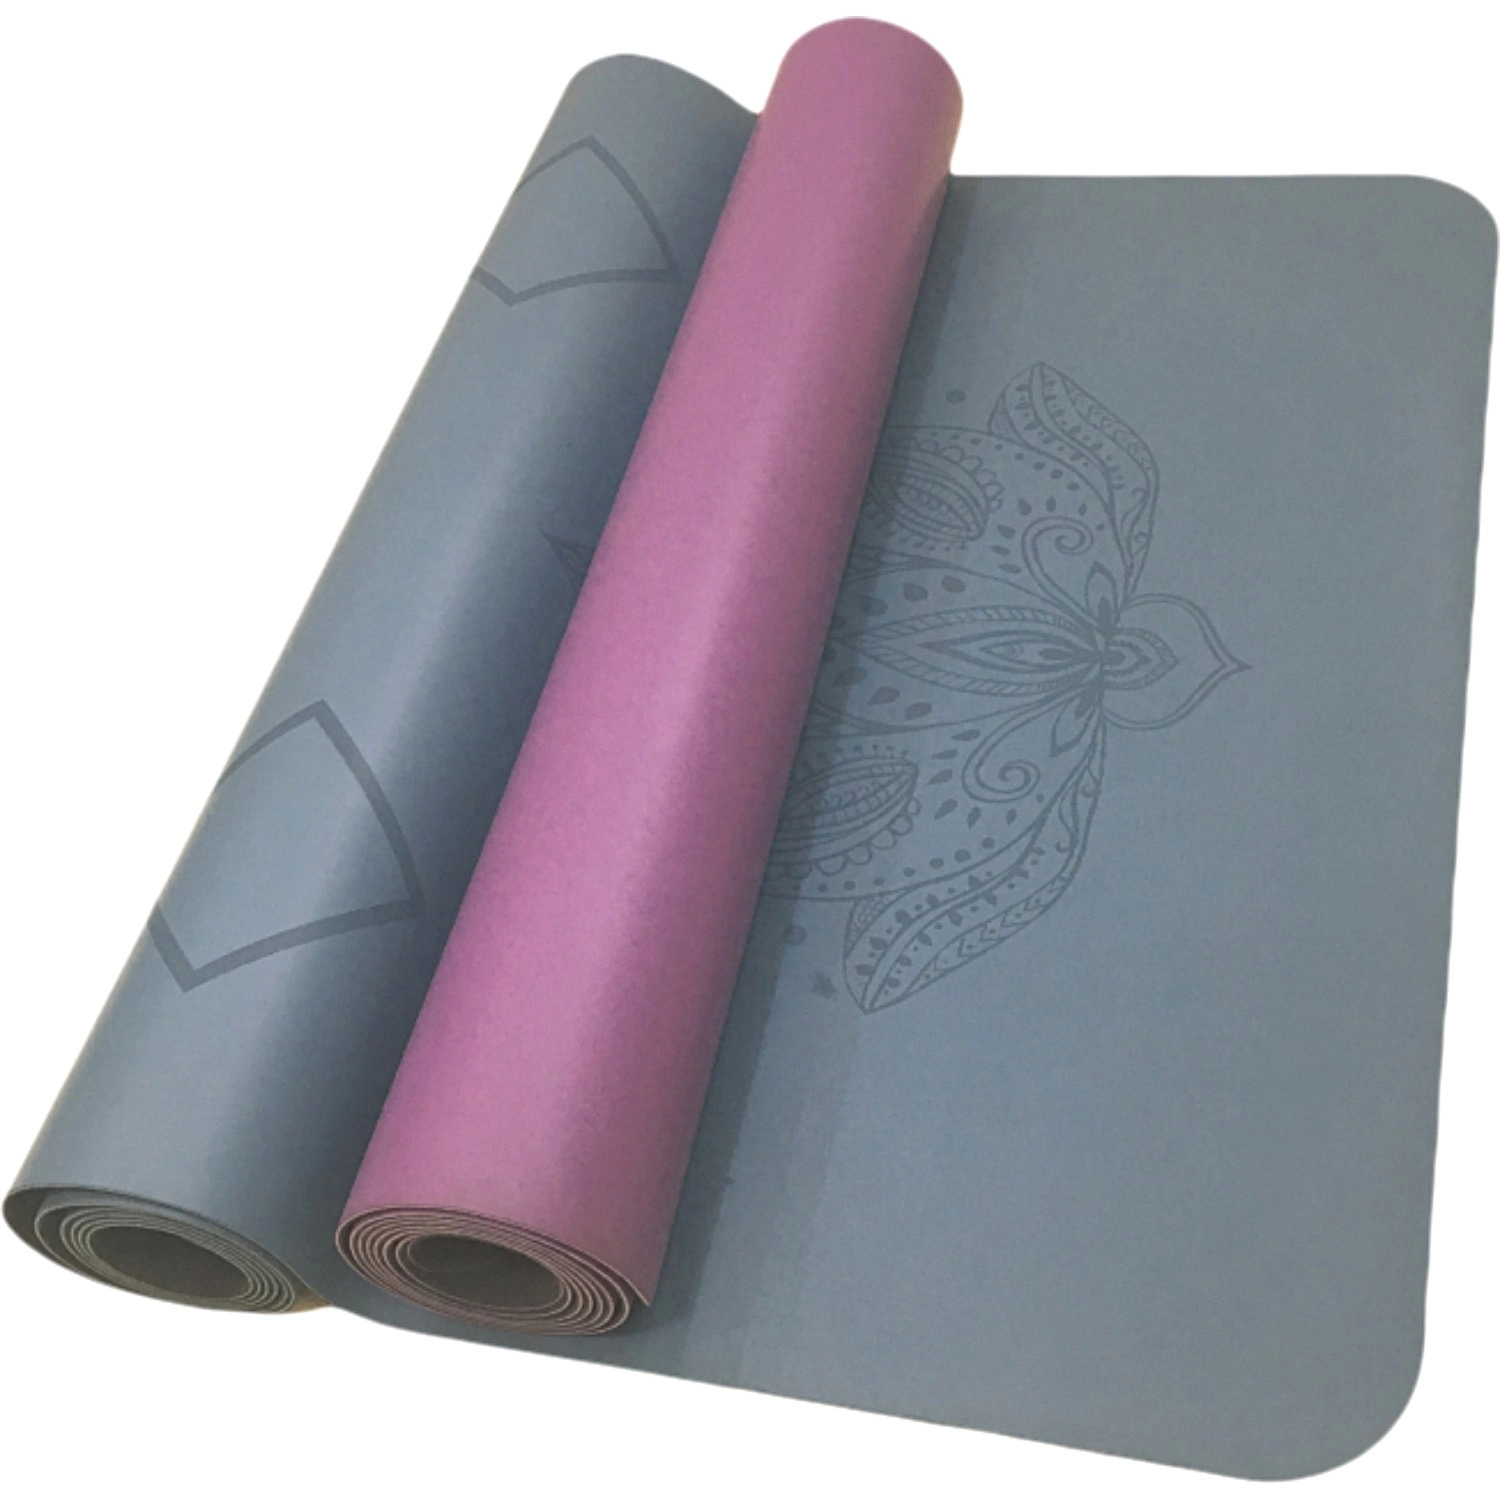 Leather PU Yoga Mat With Highly Non-slip And Elastic Quality